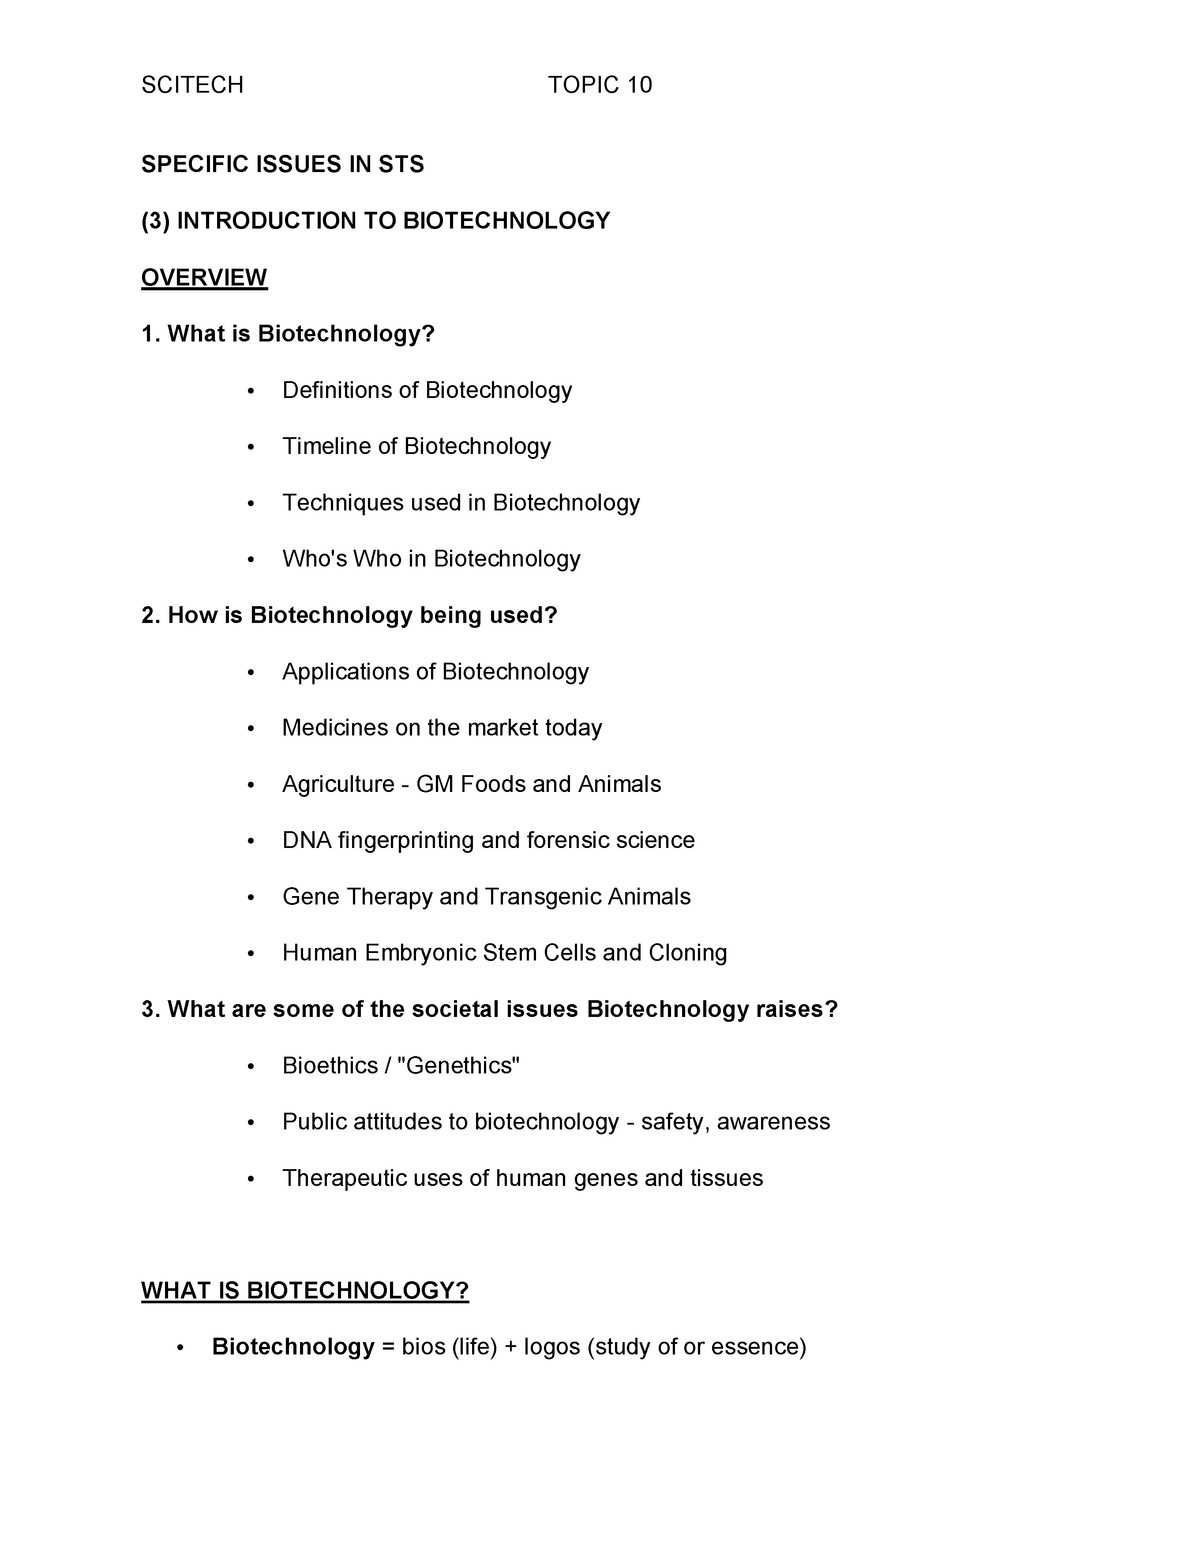 introduction to biotechnology assignment